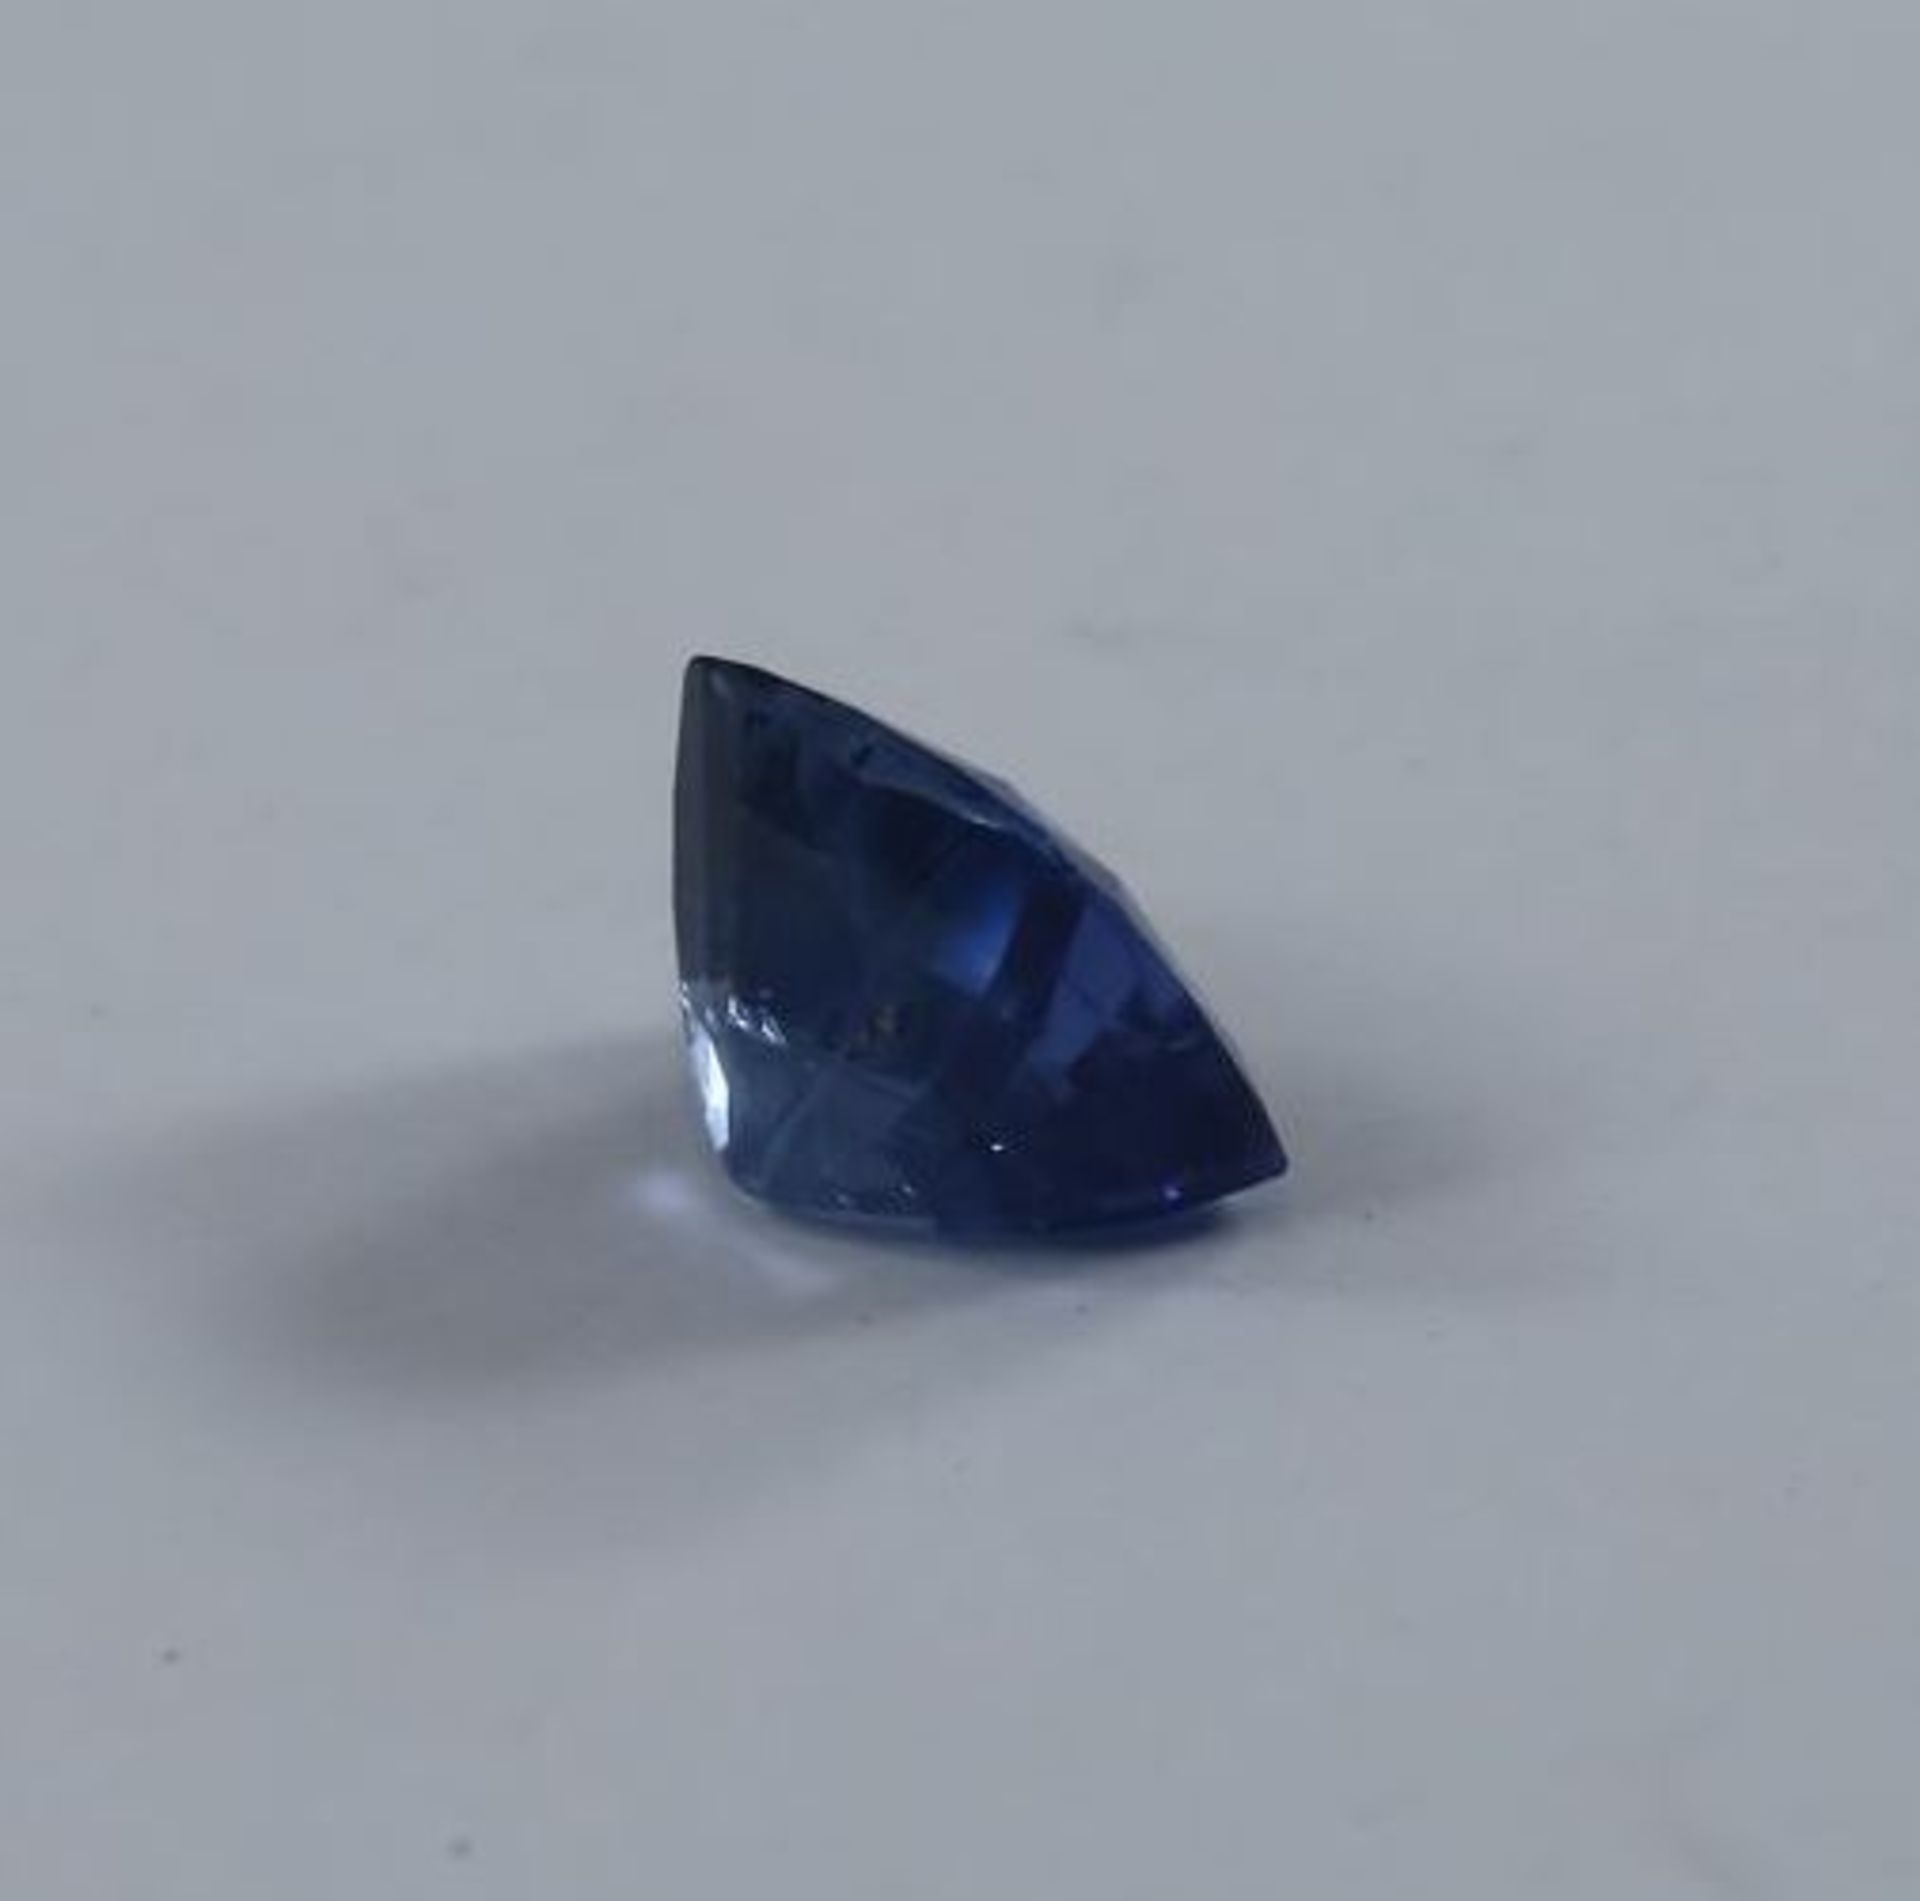 GIA Certified 5.03 ct. Blue Sapphire Untreated - Image 7 of 10